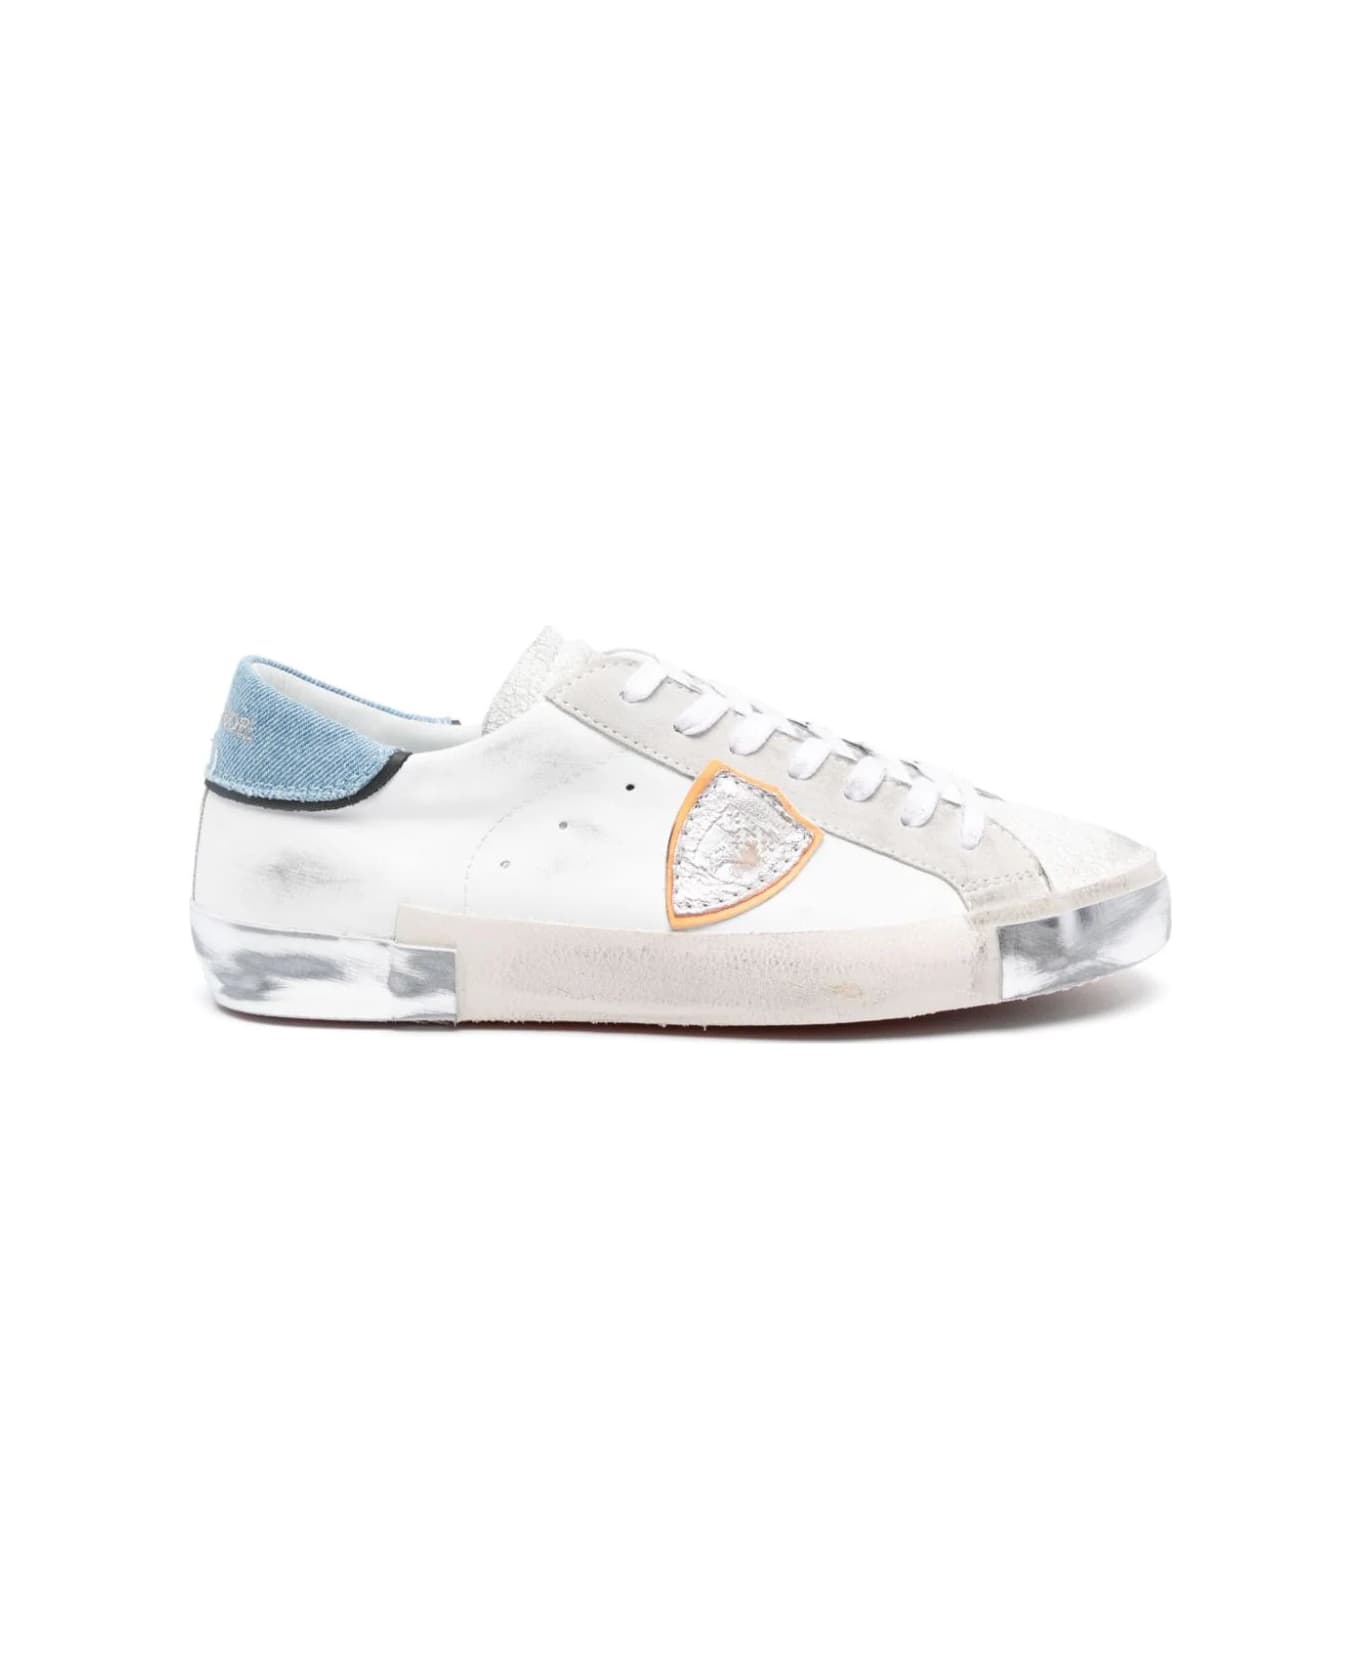 Philippe Model Prsx Low Sneakers - White And Light Blue スニーカー